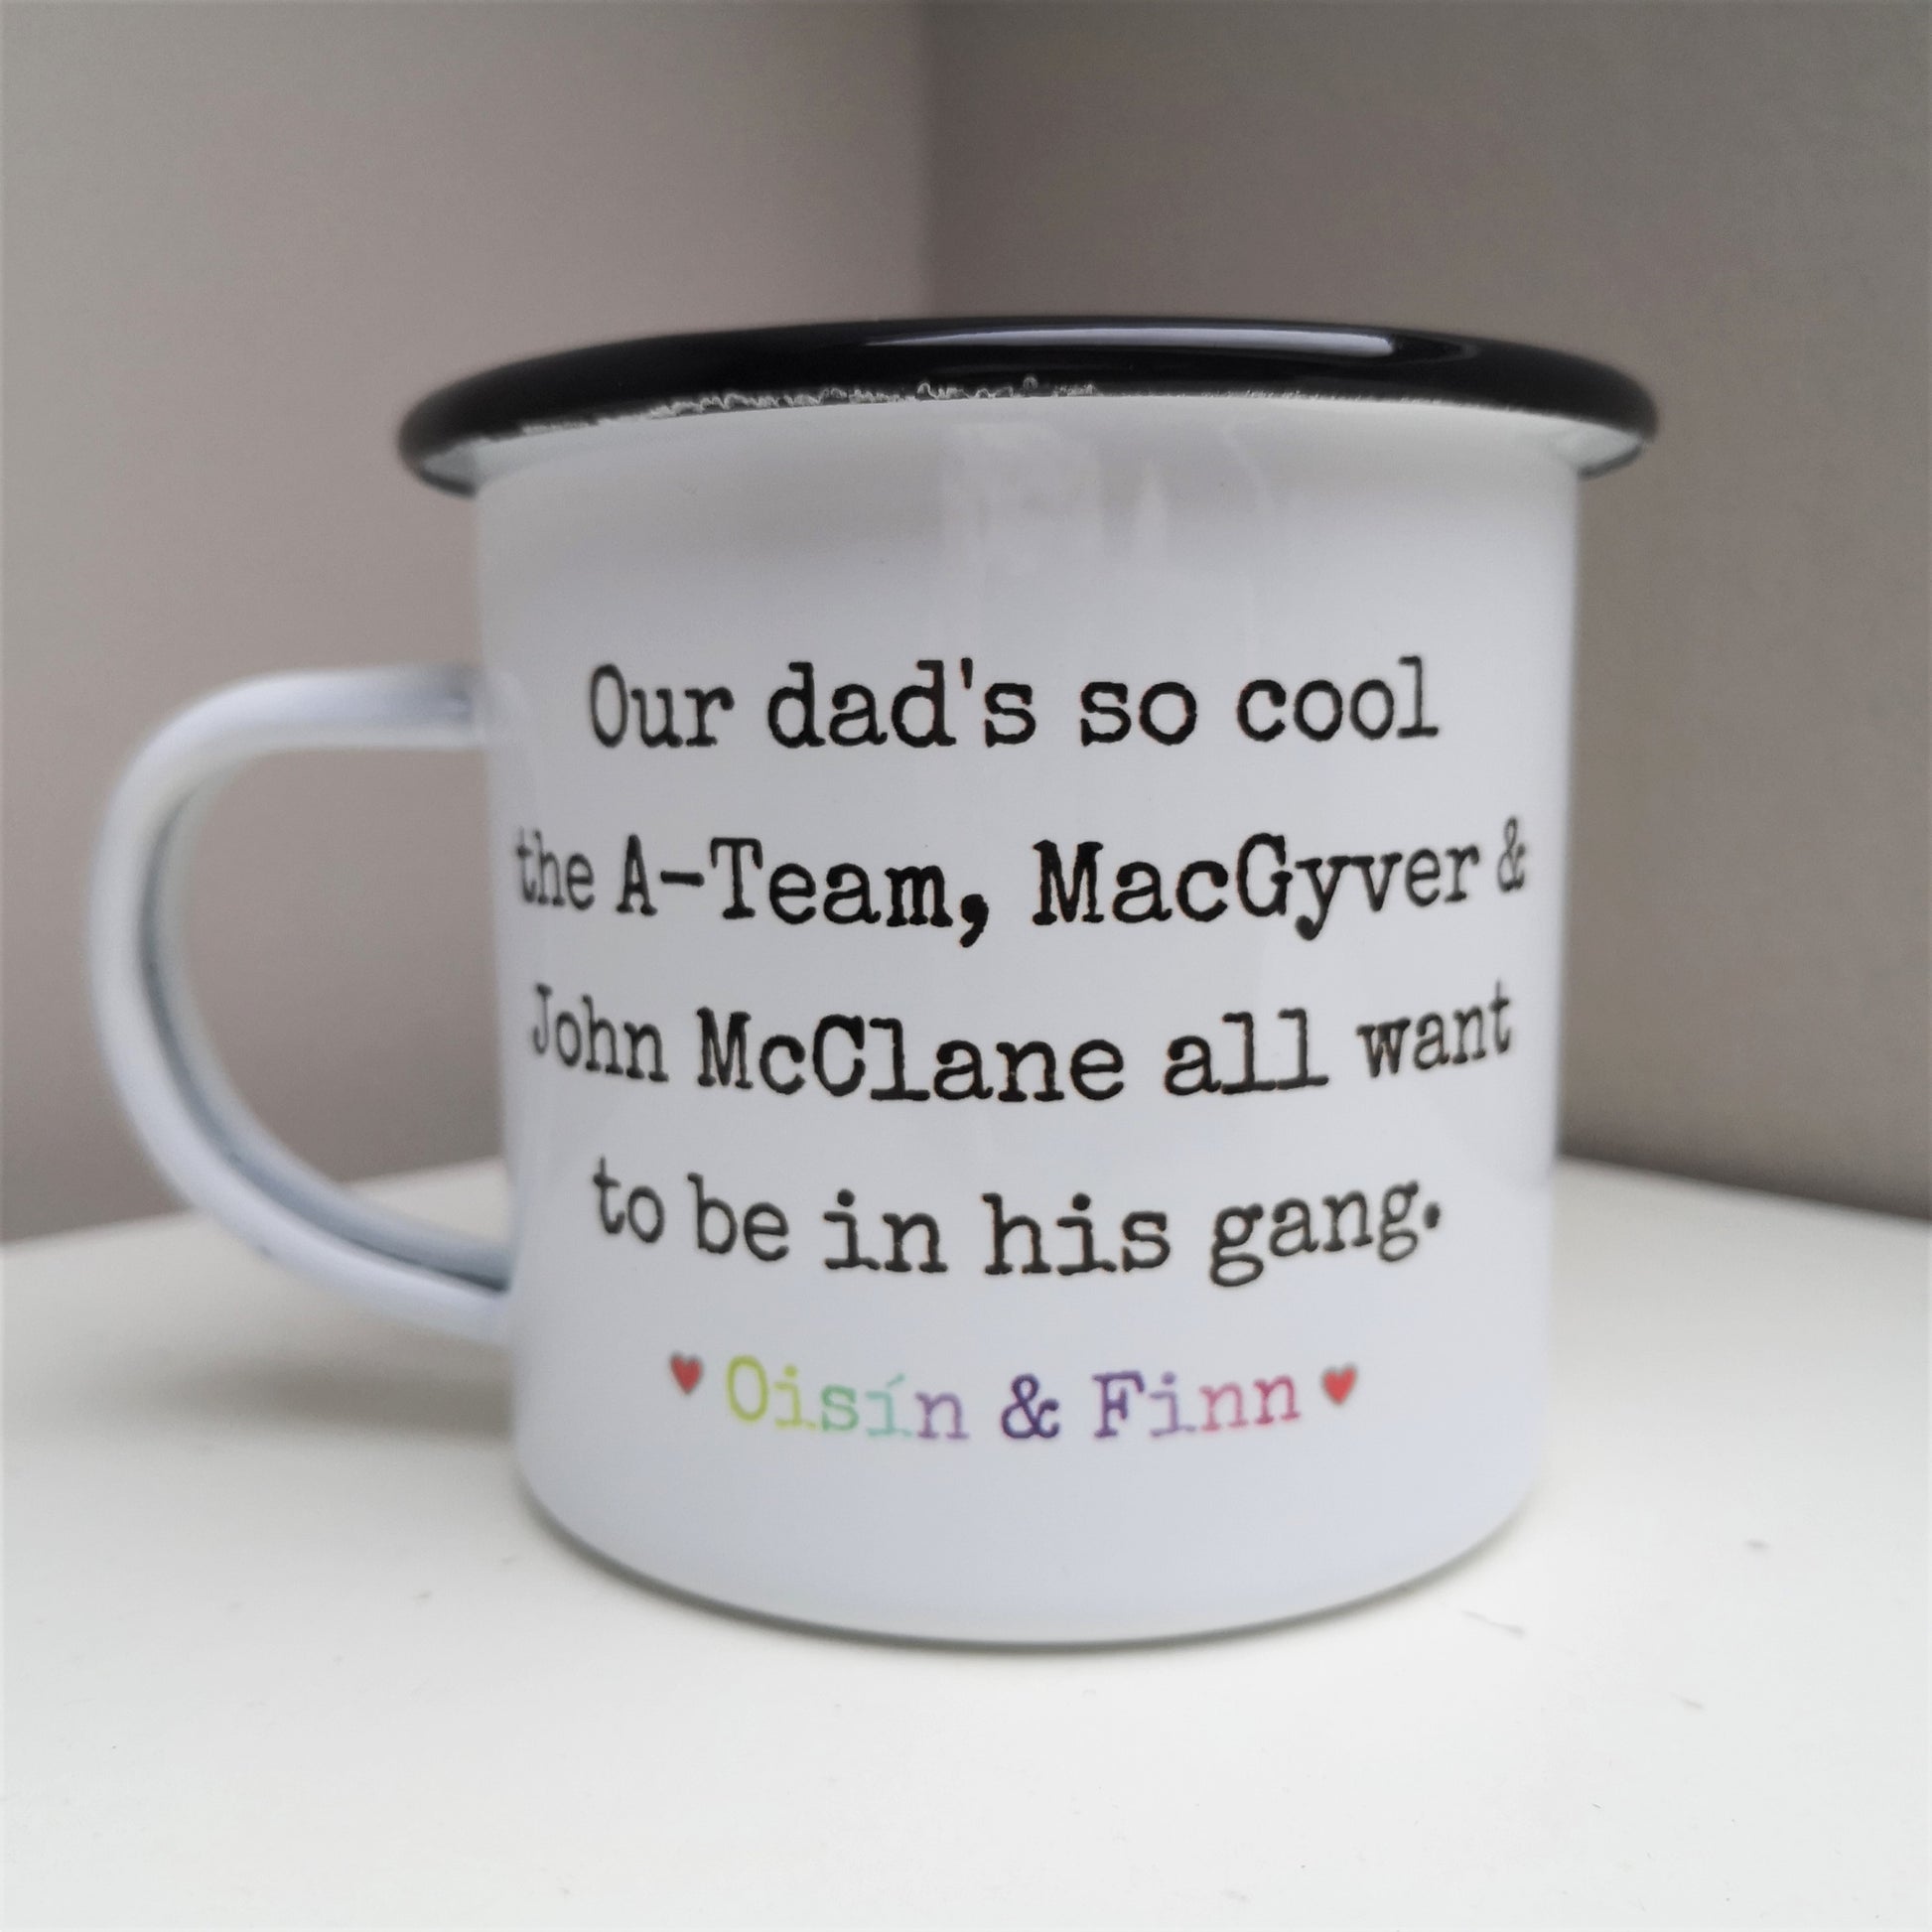 A White enamel mug with a black rim with the following on the front - Our dad's so cool the A-Team, MacGyver and John McClane all want to be in his gang. Below that text is a space for personalised names to go.